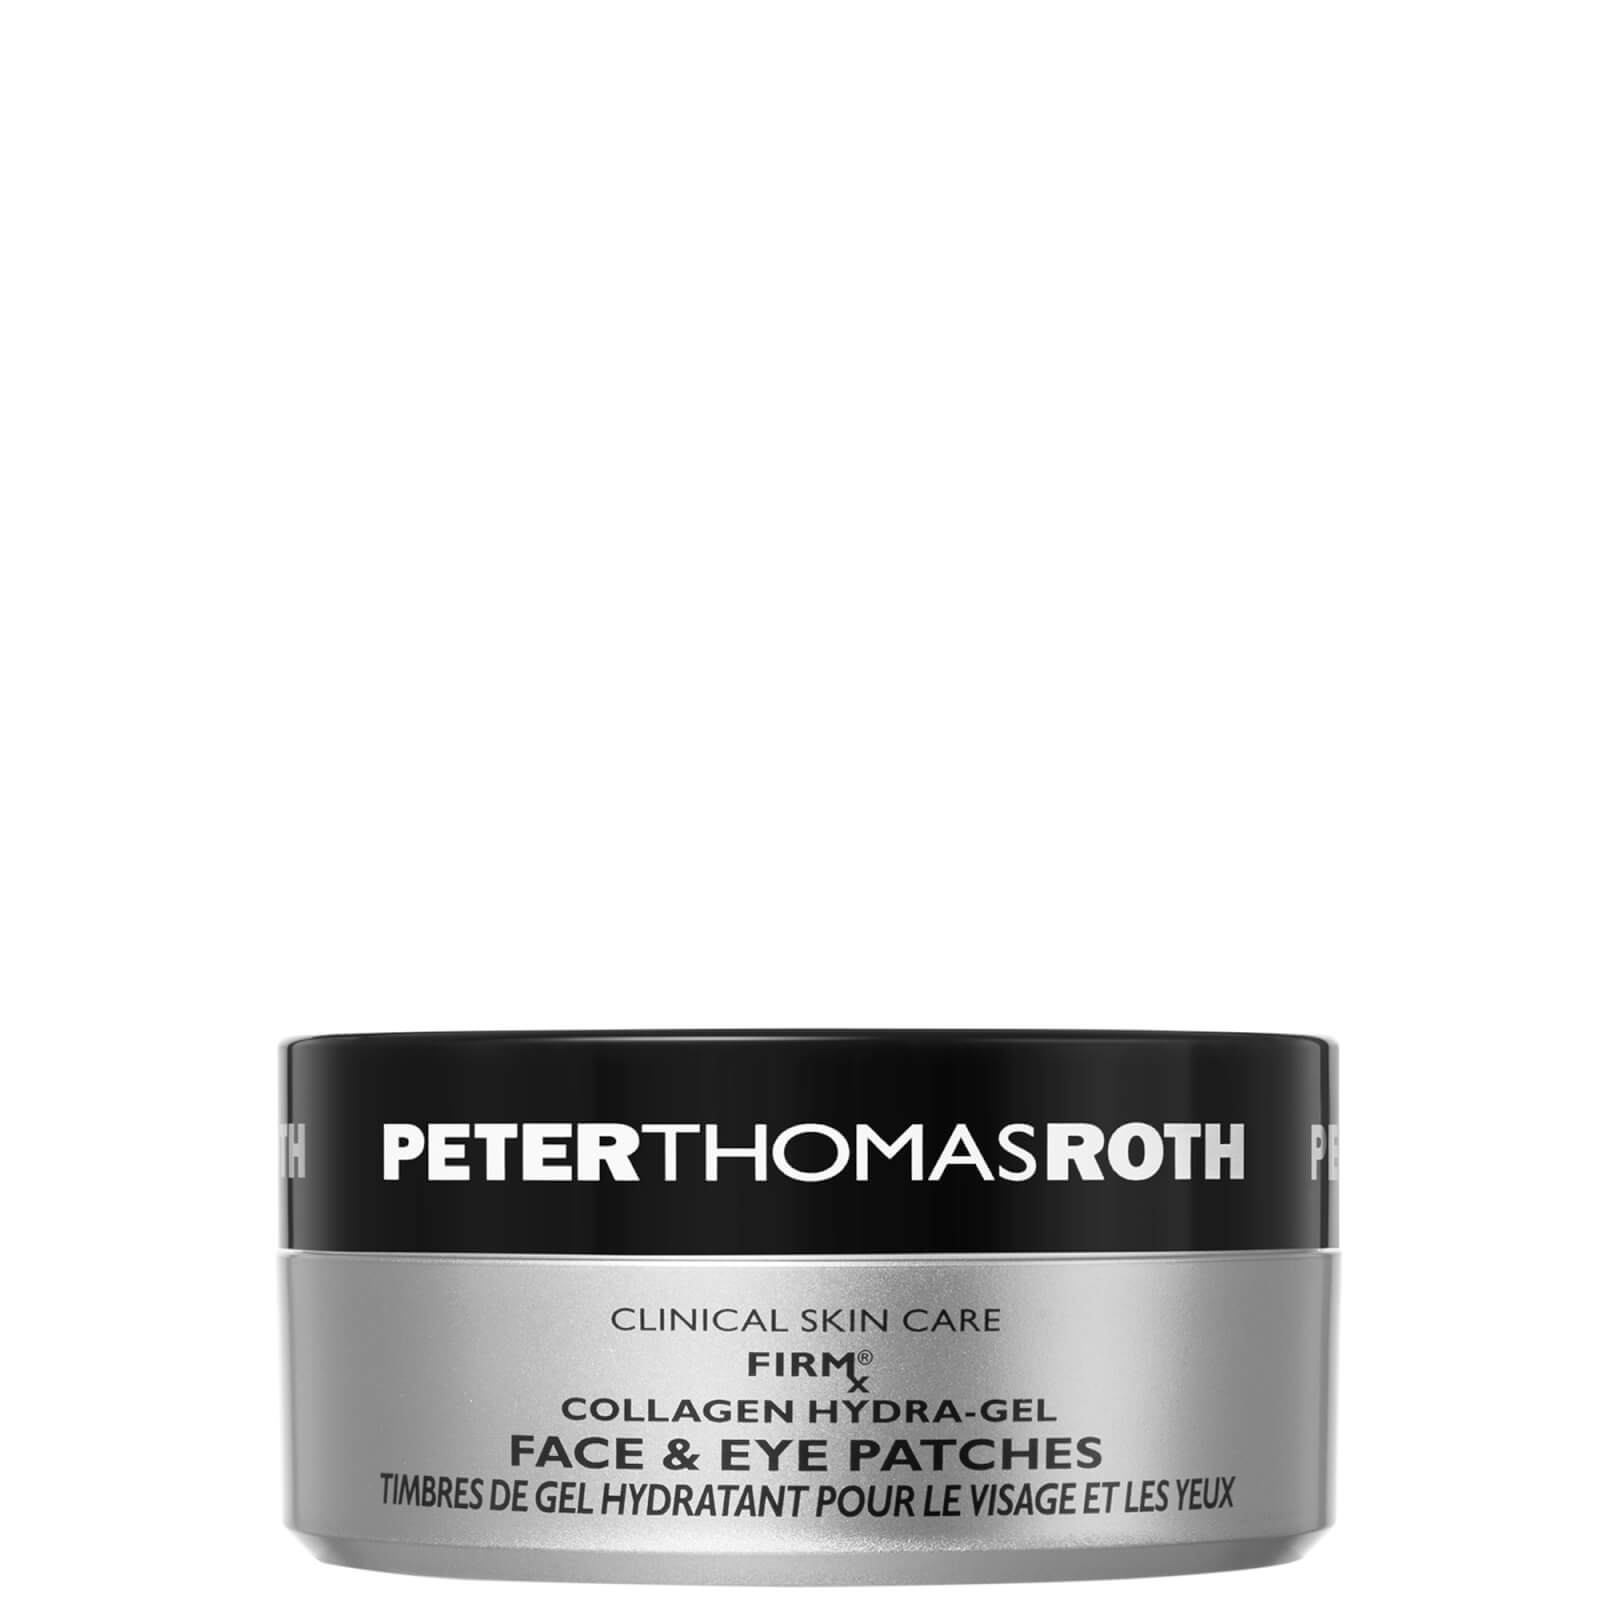 Peter Thomas Roth FIRMx Collagen Hydra-Gel Face and Eye Patches von Peter Thomas Roth